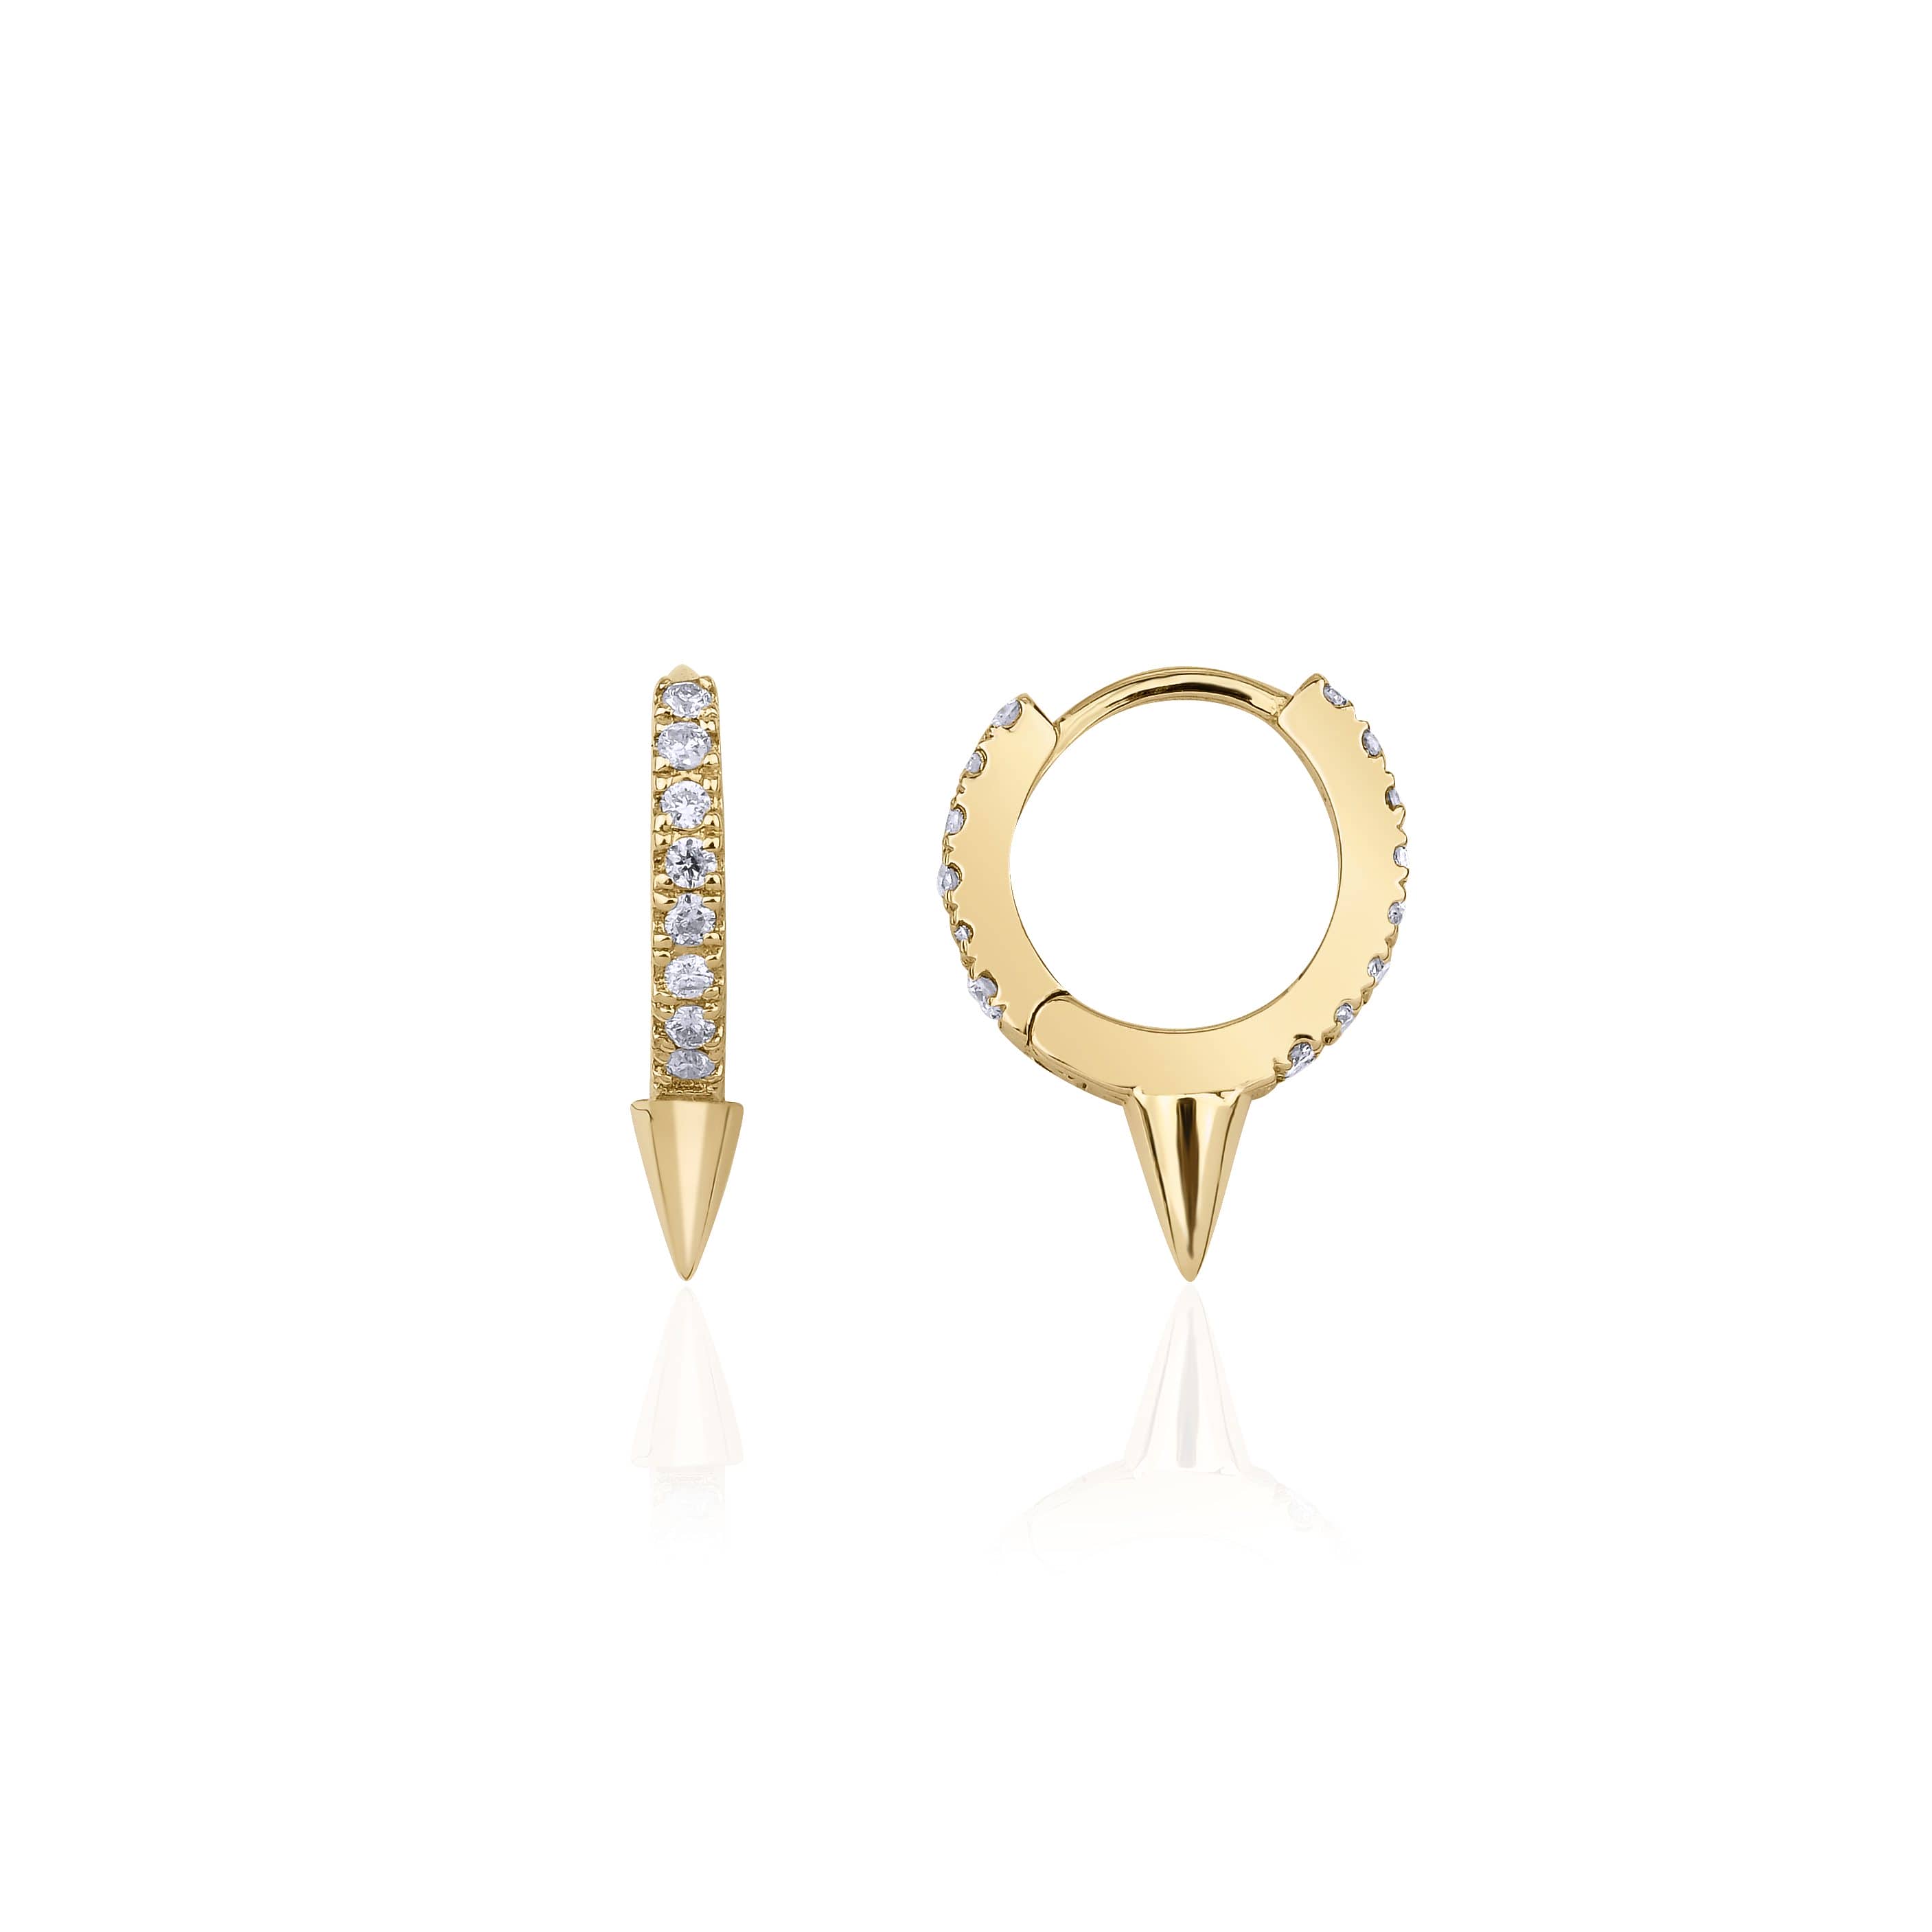 6mm Diamond And Solid Gold 0.15ct Huggies With Spikes